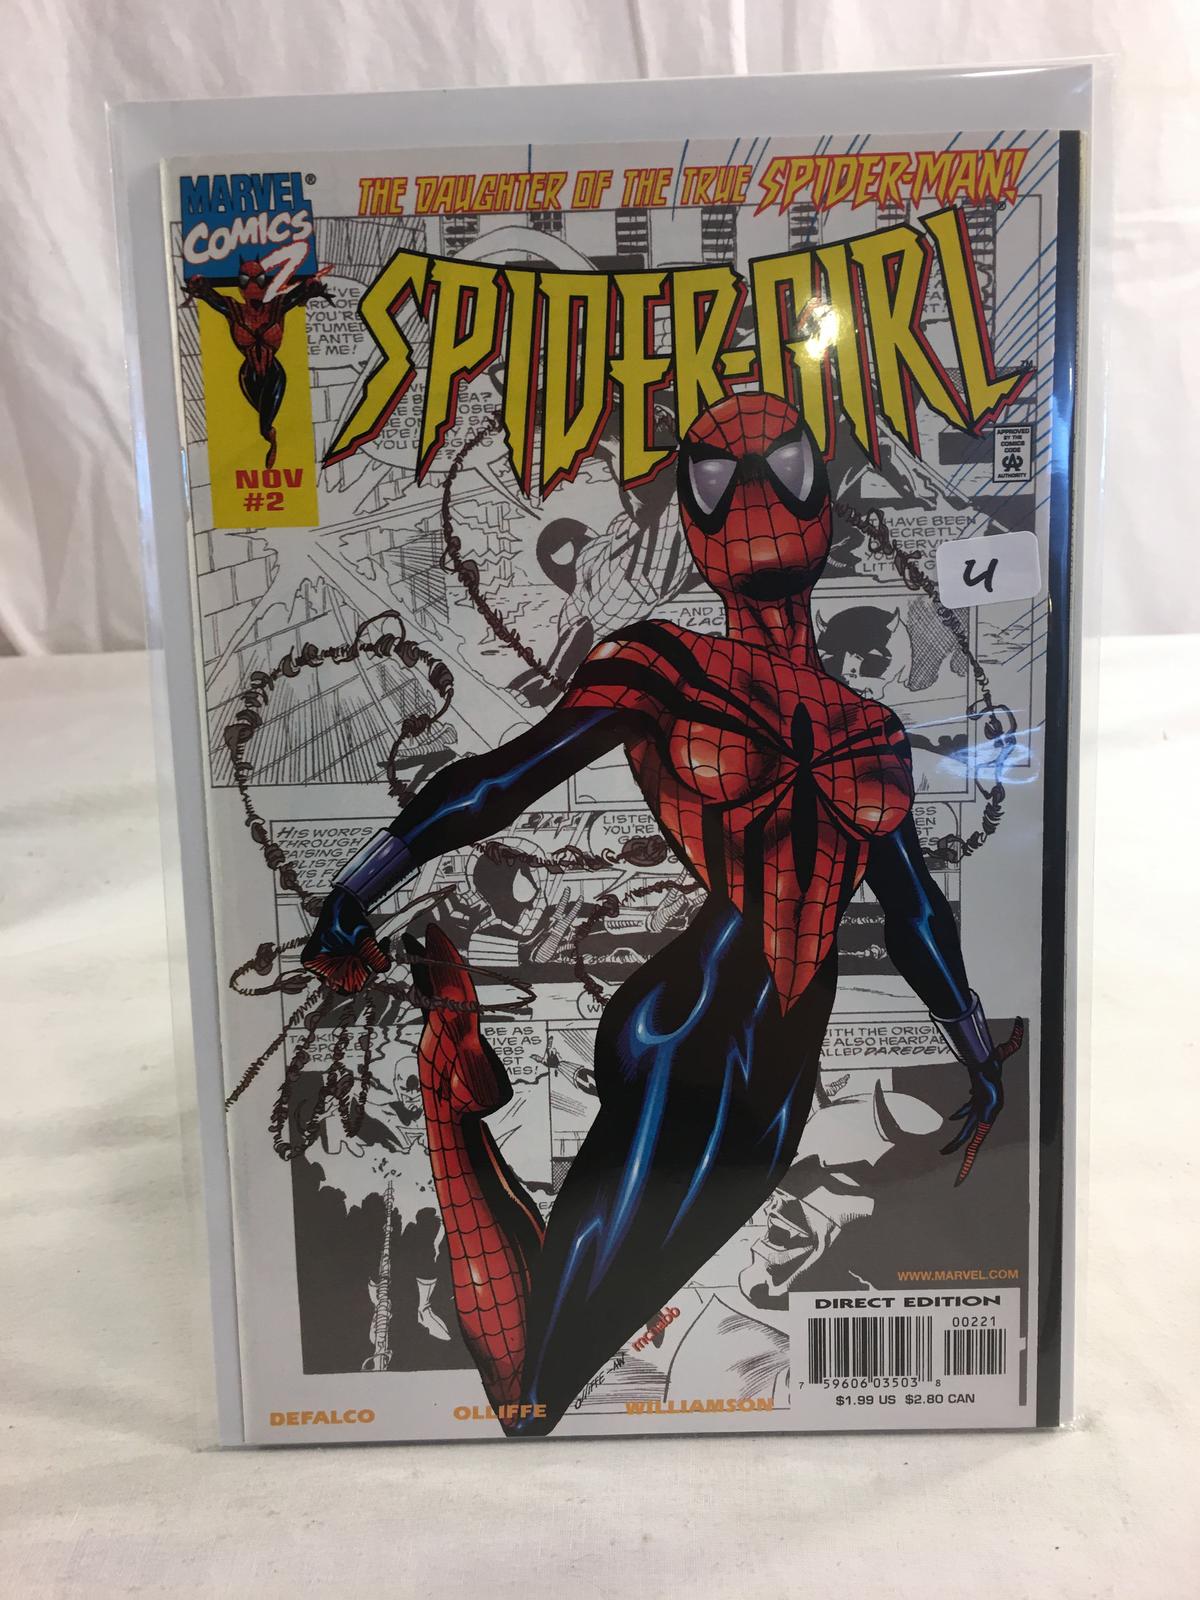 Collector Marvel Comics 2 The Daughter Of The True Spider-man Spider-Girl Comic Book #2